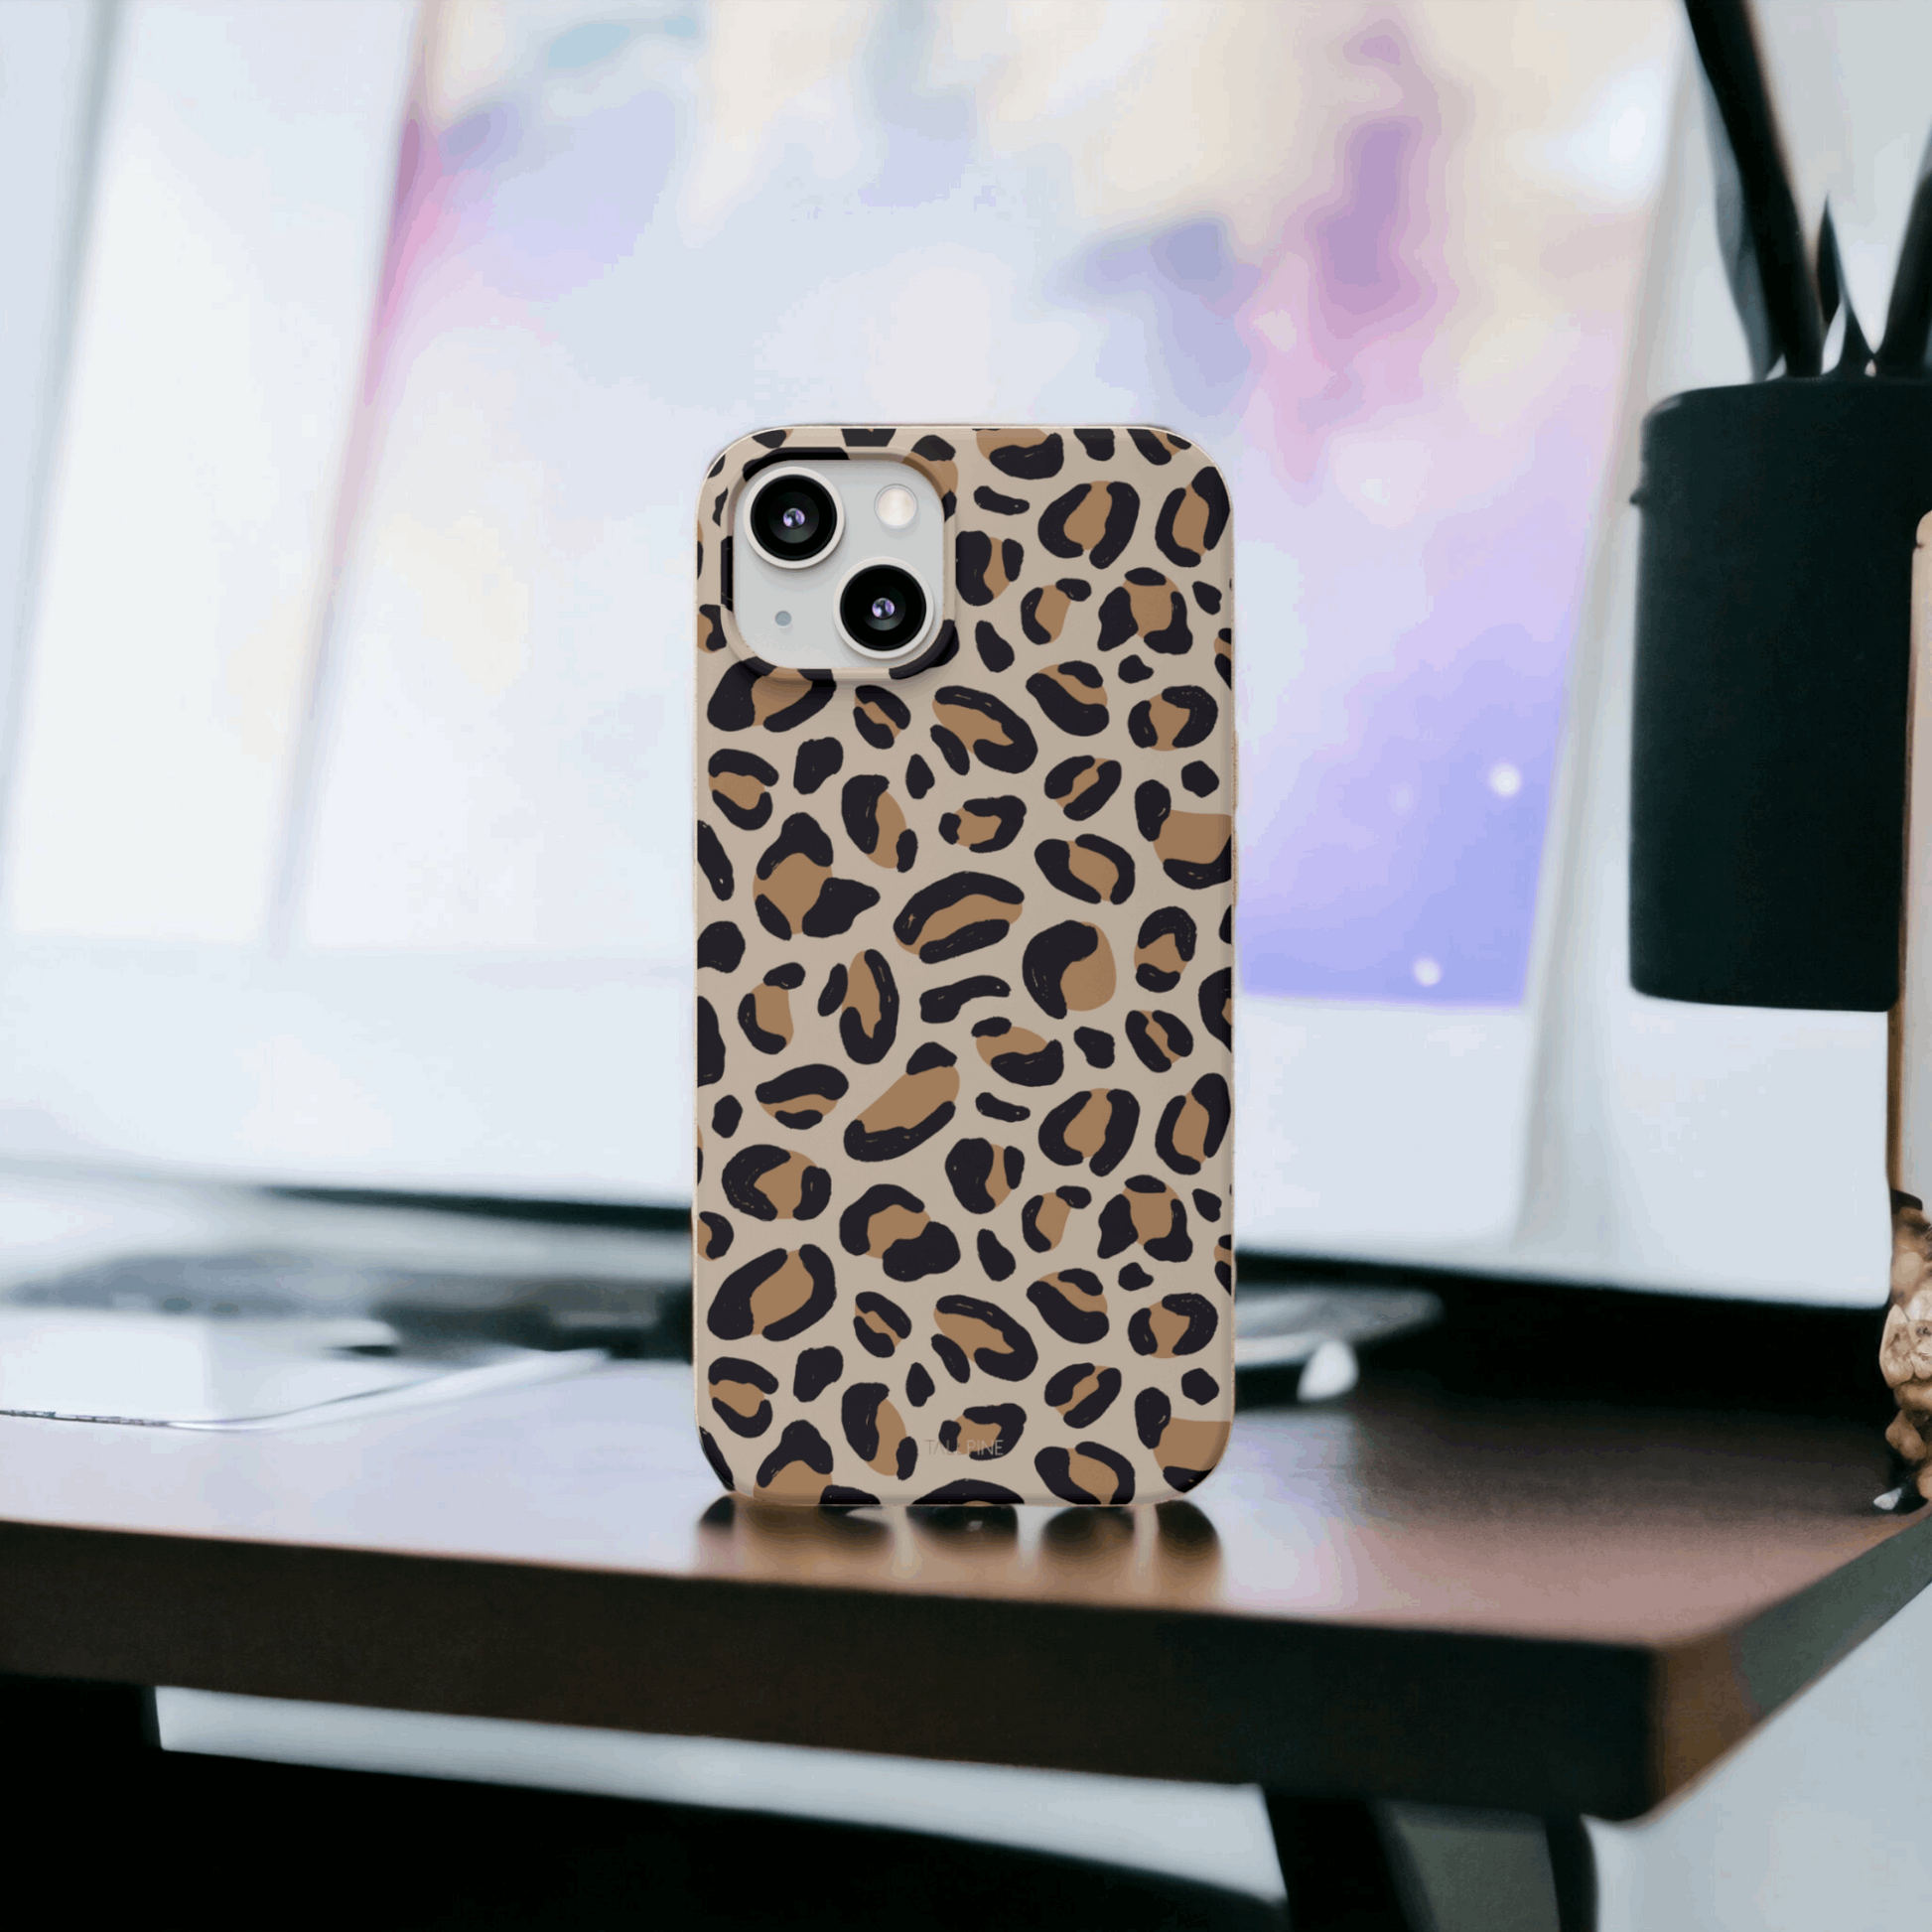 Beige Leopard - Eco Case - Tallpine | Sustainable and Eco-Friendly Phone Cases - Abstract Leopard print